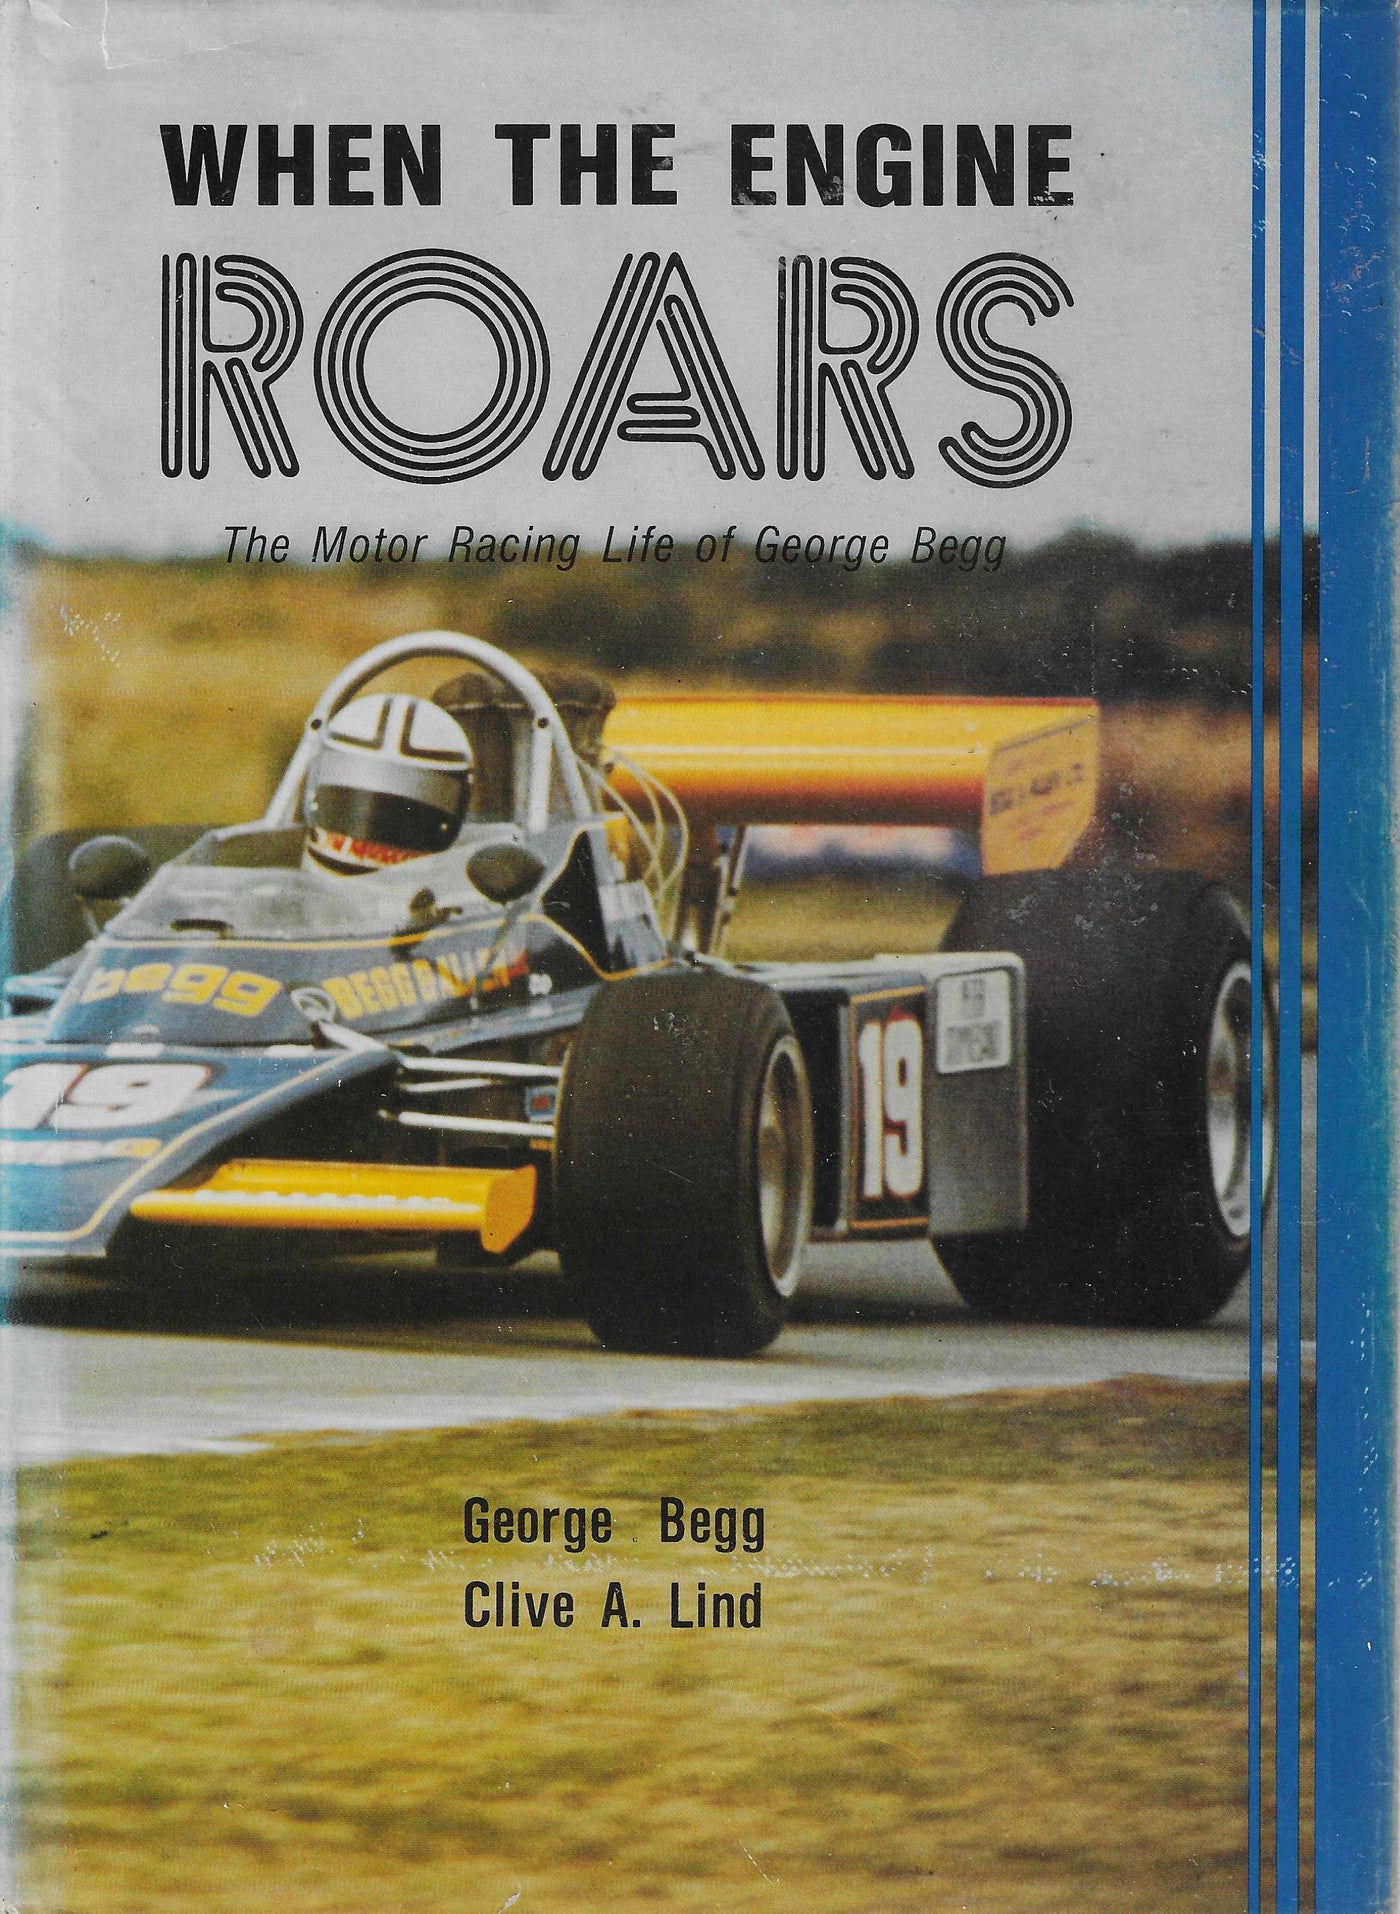 When the Engine Roars: the Motor Racing Life of George Begg